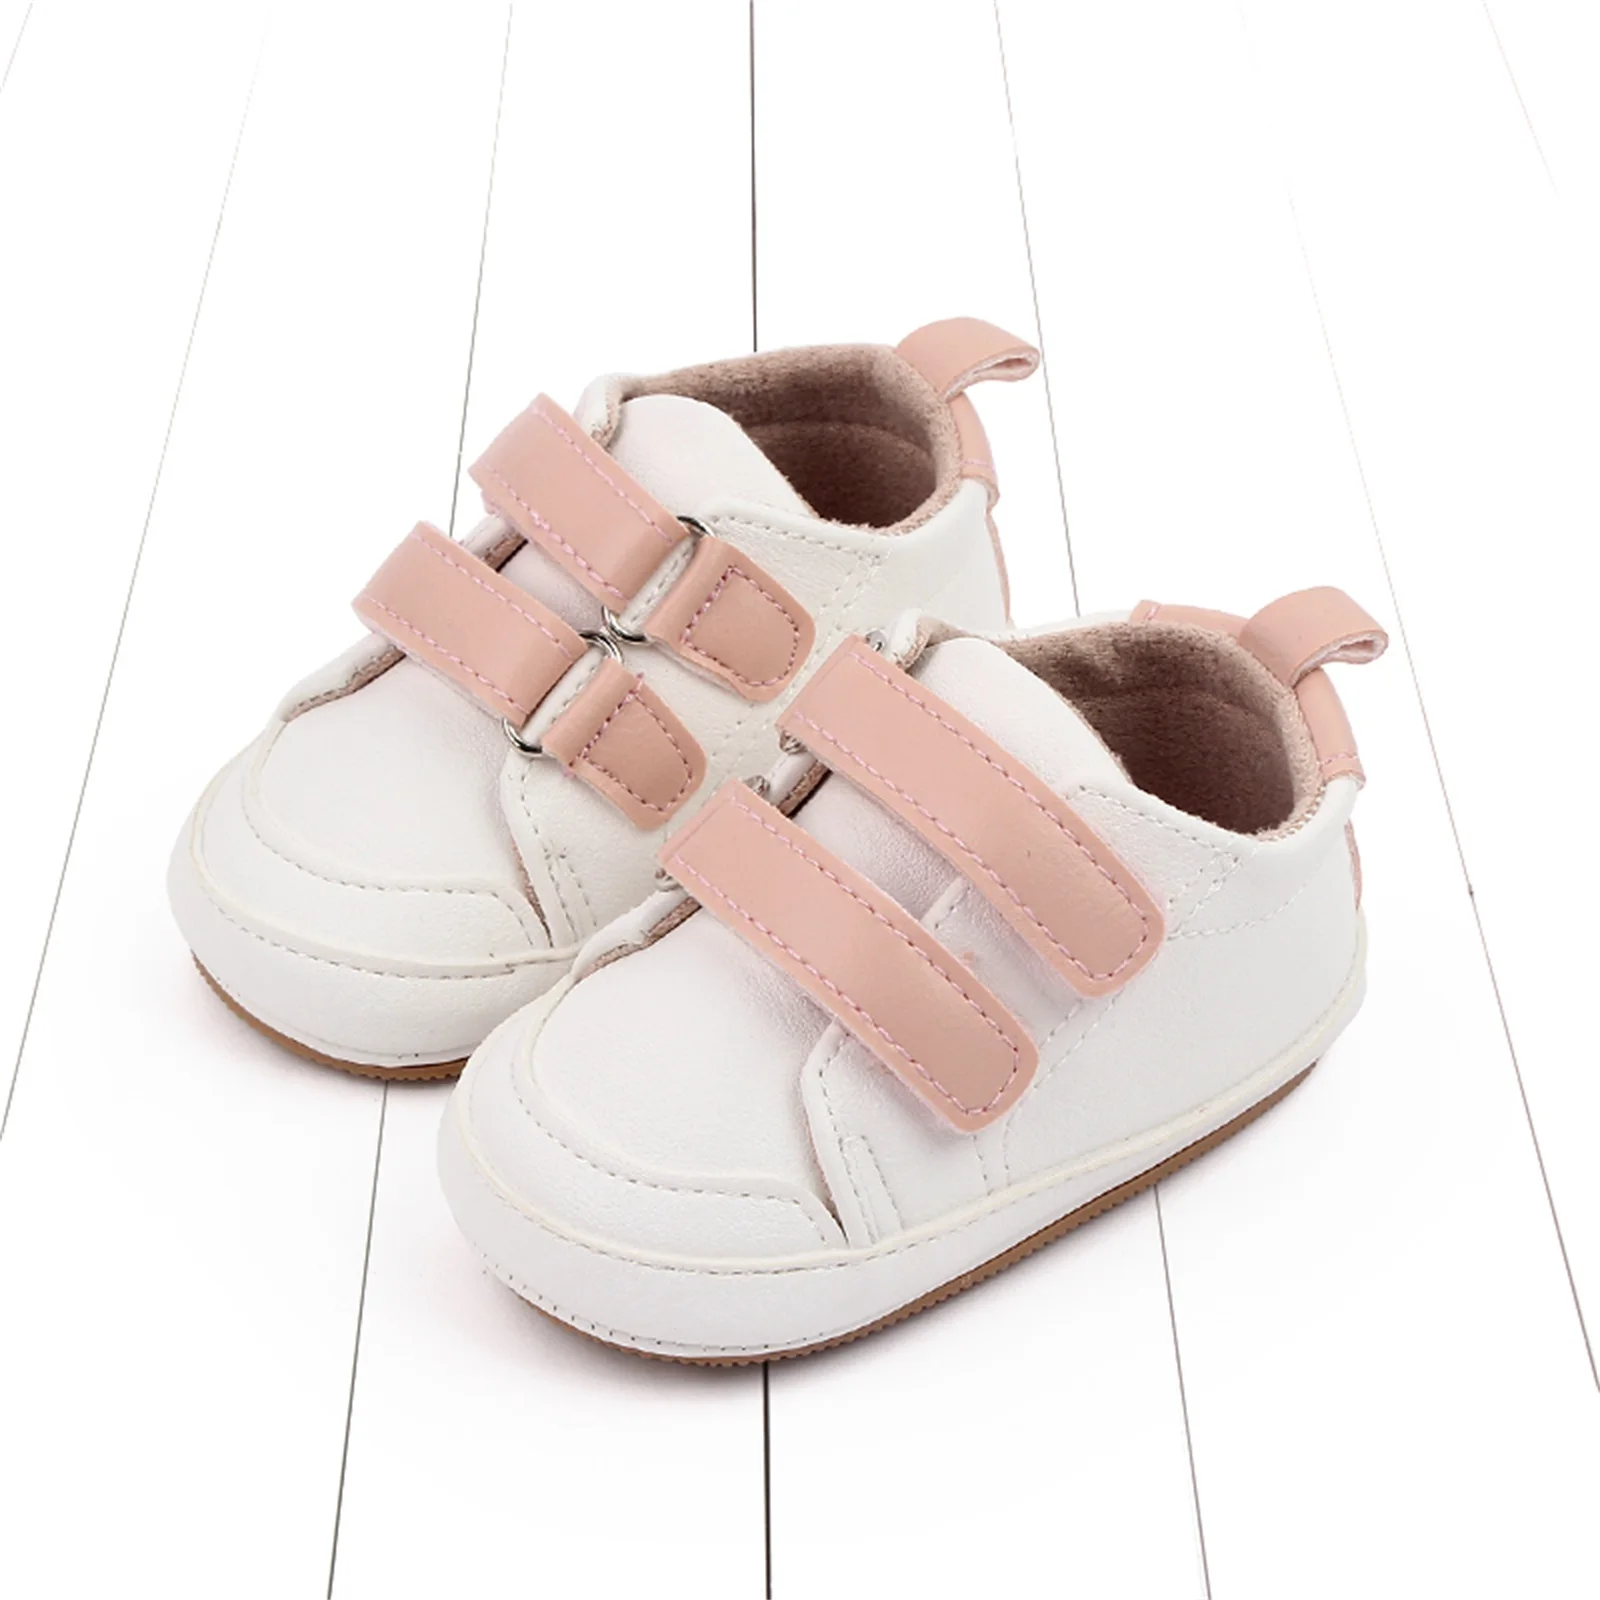 

New Baby Shoes PU Leather Moccasins Anti-Slip Sole Sneakers Toddler First Walker Close Toed Shoes Prewalker 0-18 Months